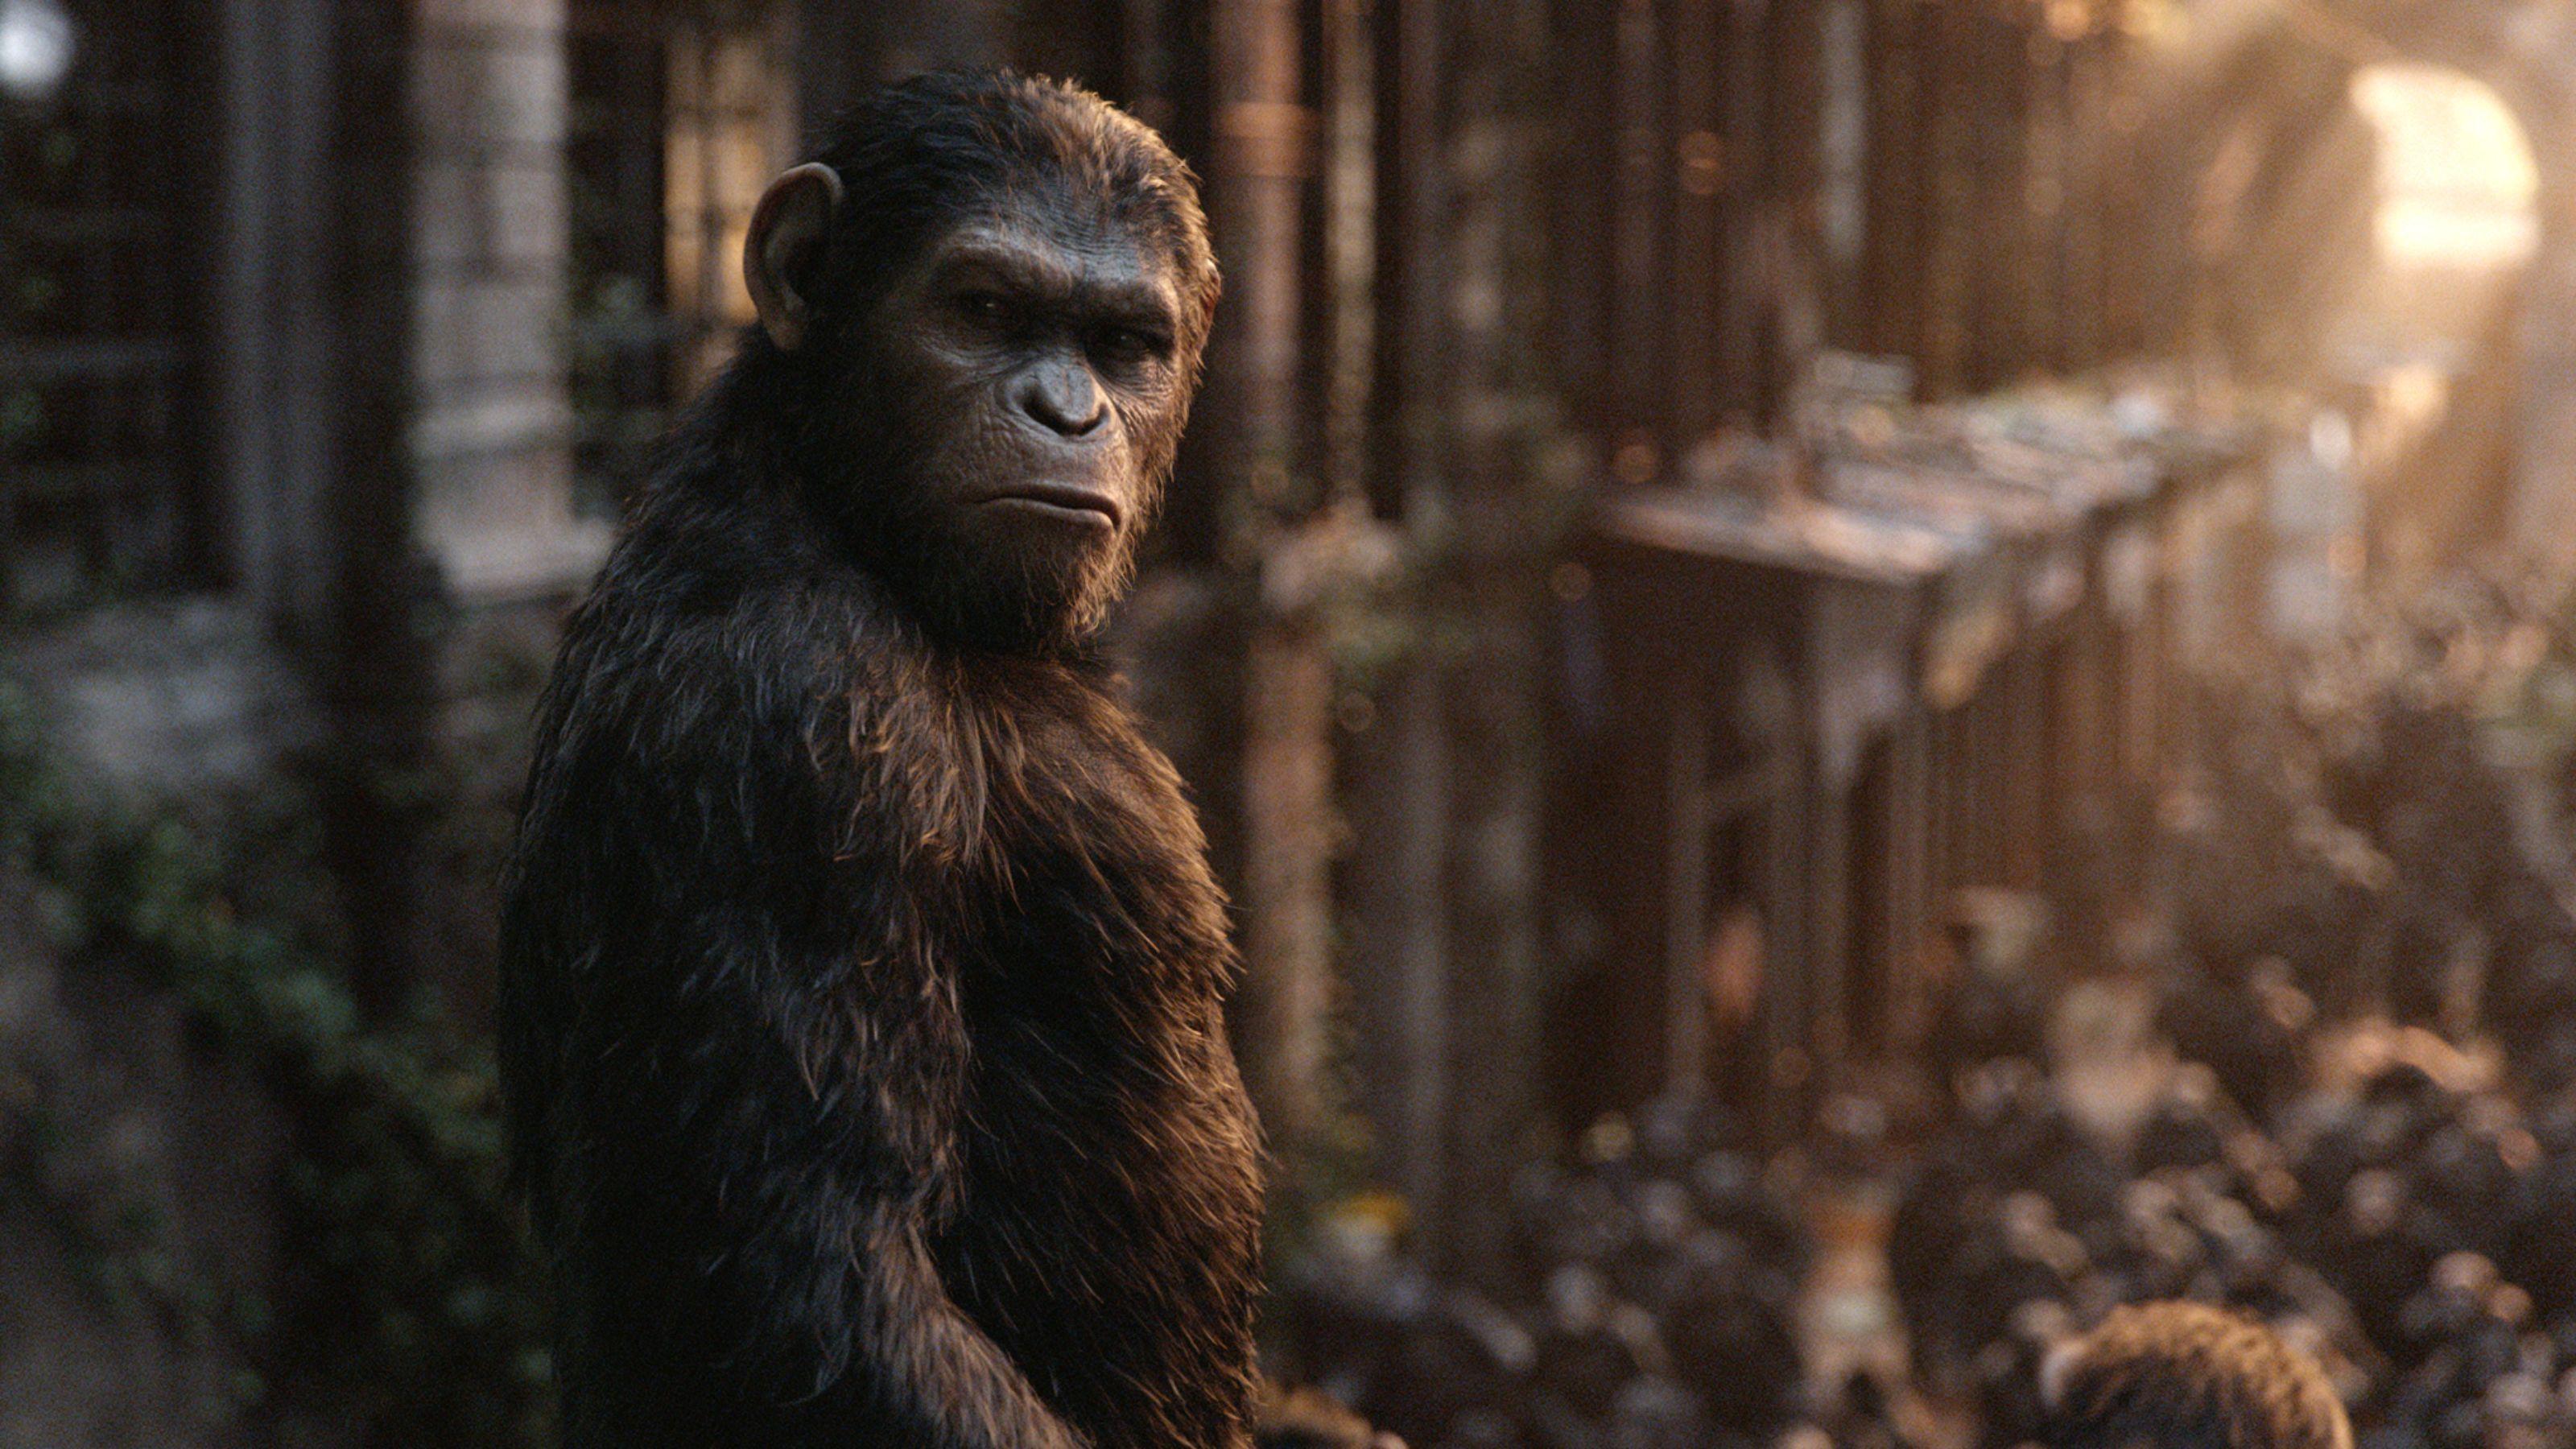 HD wallpaper Movie Rise Of The Planet Of The Apes  Wallpaper Flare